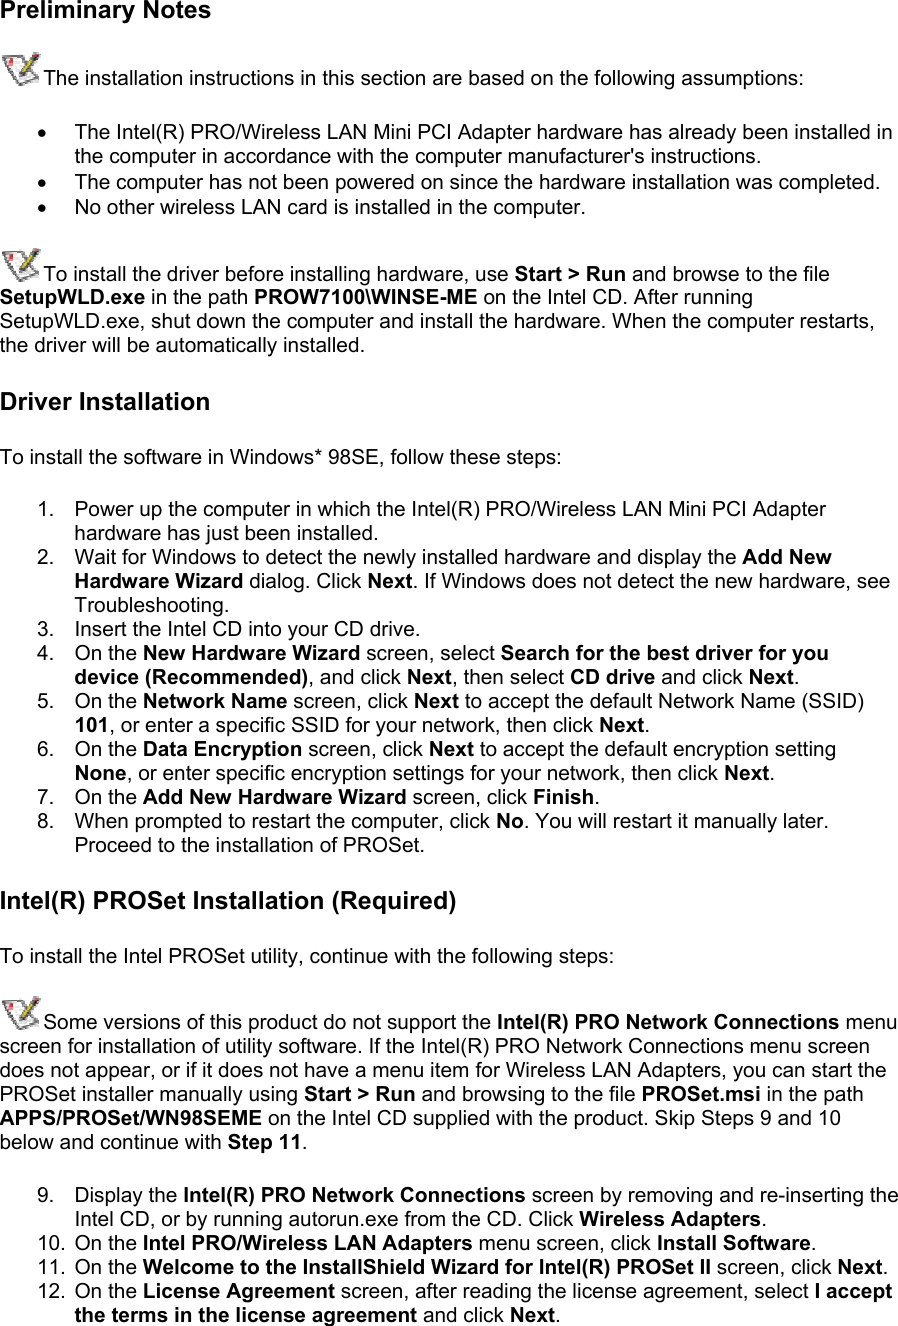 Preliminary Notes The installation instructions in this section are based on the following assumptions: •  The Intel(R) PRO/Wireless LAN Mini PCI Adapter hardware has already been installed in the computer in accordance with the computer manufacturer&apos;s instructions. •  The computer has not been powered on since the hardware installation was completed. •  No other wireless LAN card is installed in the computer. To install the driver before installing hardware, use Start &gt; Run and browse to the file SetupWLD.exe in the path PROW7100\WINSE-ME on the Intel CD. After running SetupWLD.exe, shut down the computer and install the hardware. When the computer restarts, the driver will be automatically installed. Driver Installation To install the software in Windows* 98SE, follow these steps:  1.  Power up the computer in which the Intel(R) PRO/Wireless LAN Mini PCI Adapter hardware has just been installed. 2.  Wait for Windows to detect the newly installed hardware and display the Add New Hardware Wizard dialog. Click Next. If Windows does not detect the new hardware, see Troubleshooting. 3.  Insert the Intel CD into your CD drive.  4. On the New Hardware Wizard screen, select Search for the best driver for you device (Recommended), and click Next, then select CD drive and click Next. 5. On the Network Name screen, click Next to accept the default Network Name (SSID) 101, or enter a specific SSID for your network, then click Next. 6. On the Data Encryption screen, click Next to accept the default encryption setting None, or enter specific encryption settings for your network, then click Next. 7. On the Add New Hardware Wizard screen, click Finish. 8.  When prompted to restart the computer, click No. You will restart it manually later. Proceed to the installation of PROSet. Intel(R) PROSet Installation (Required) To install the Intel PROSet utility, continue with the following steps: Some versions of this product do not support the Intel(R) PRO Network Connections menu screen for installation of utility software. If the Intel(R) PRO Network Connections menu screen does not appear, or if it does not have a menu item for Wireless LAN Adapters, you can start the PROSet installer manually using Start &gt; Run and browsing to the file PROSet.msi in the path APPS/PROSet/WN98SEME on the Intel CD supplied with the product. Skip Steps 9 and 10 below and continue with Step 11.  9. Display the Intel(R) PRO Network Connections screen by removing and re-inserting the Intel CD, or by running autorun.exe from the CD. Click Wireless Adapters. 10. On the Intel PRO/Wireless LAN Adapters menu screen, click Install Software. 11. On the Welcome to the InstallShield Wizard for Intel(R) PROSet II screen, click Next. 12. On the License Agreement screen, after reading the license agreement, select I accept the terms in the license agreement and click Next. 